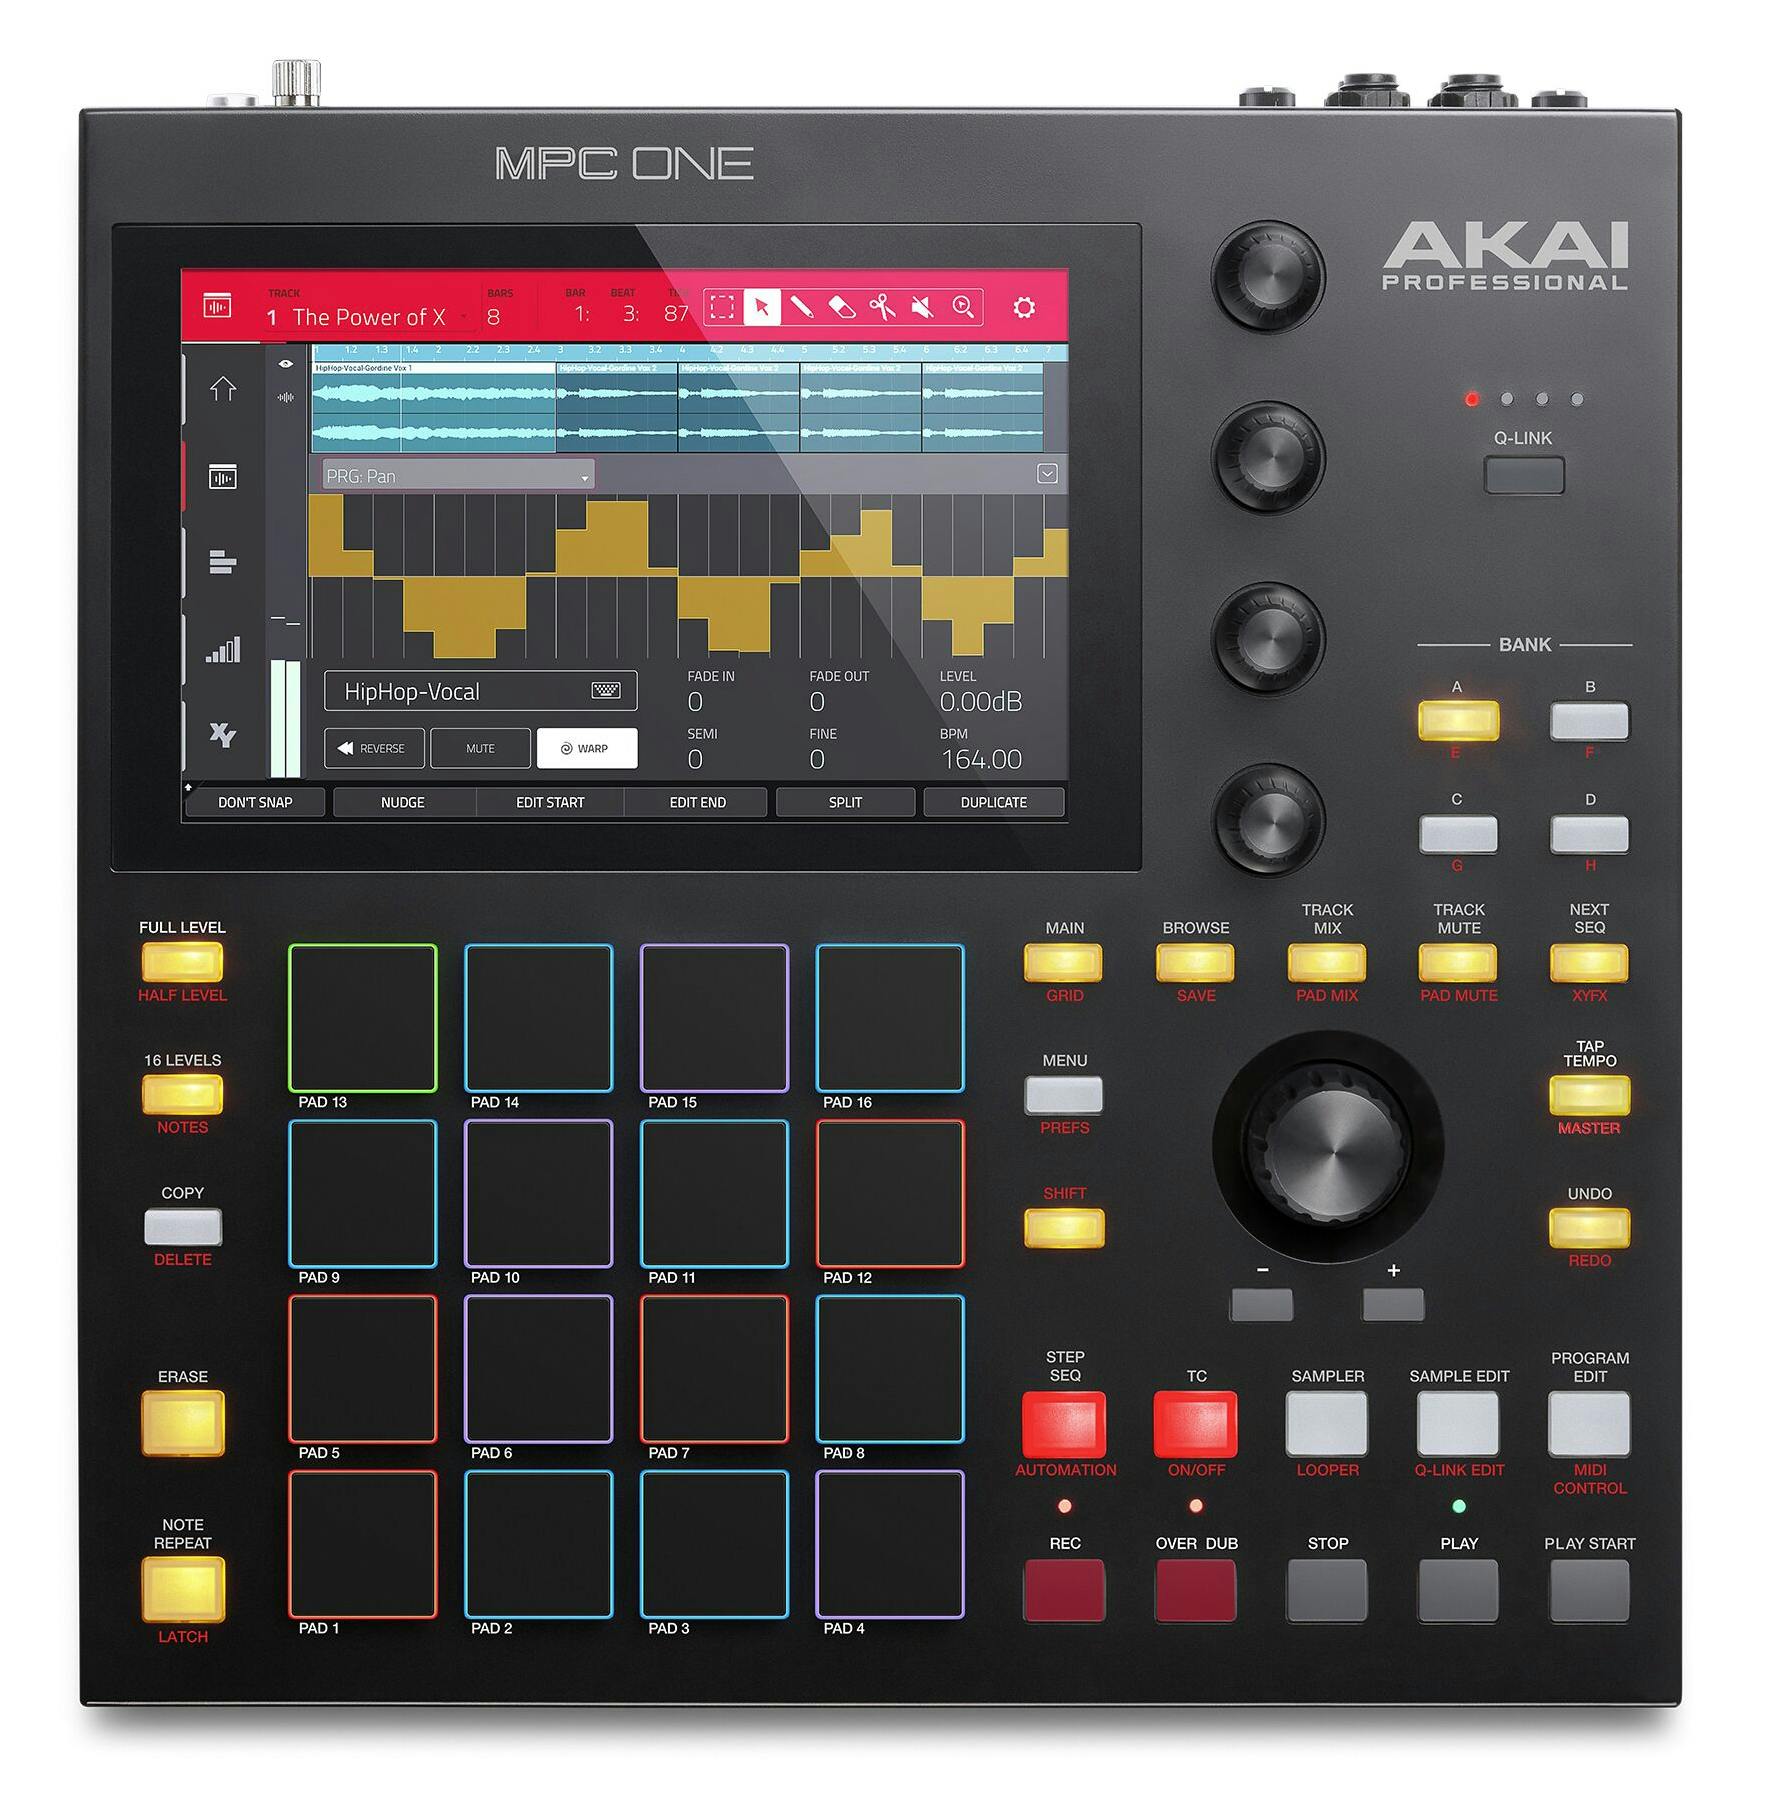 finding mpc 2 and mpc 3